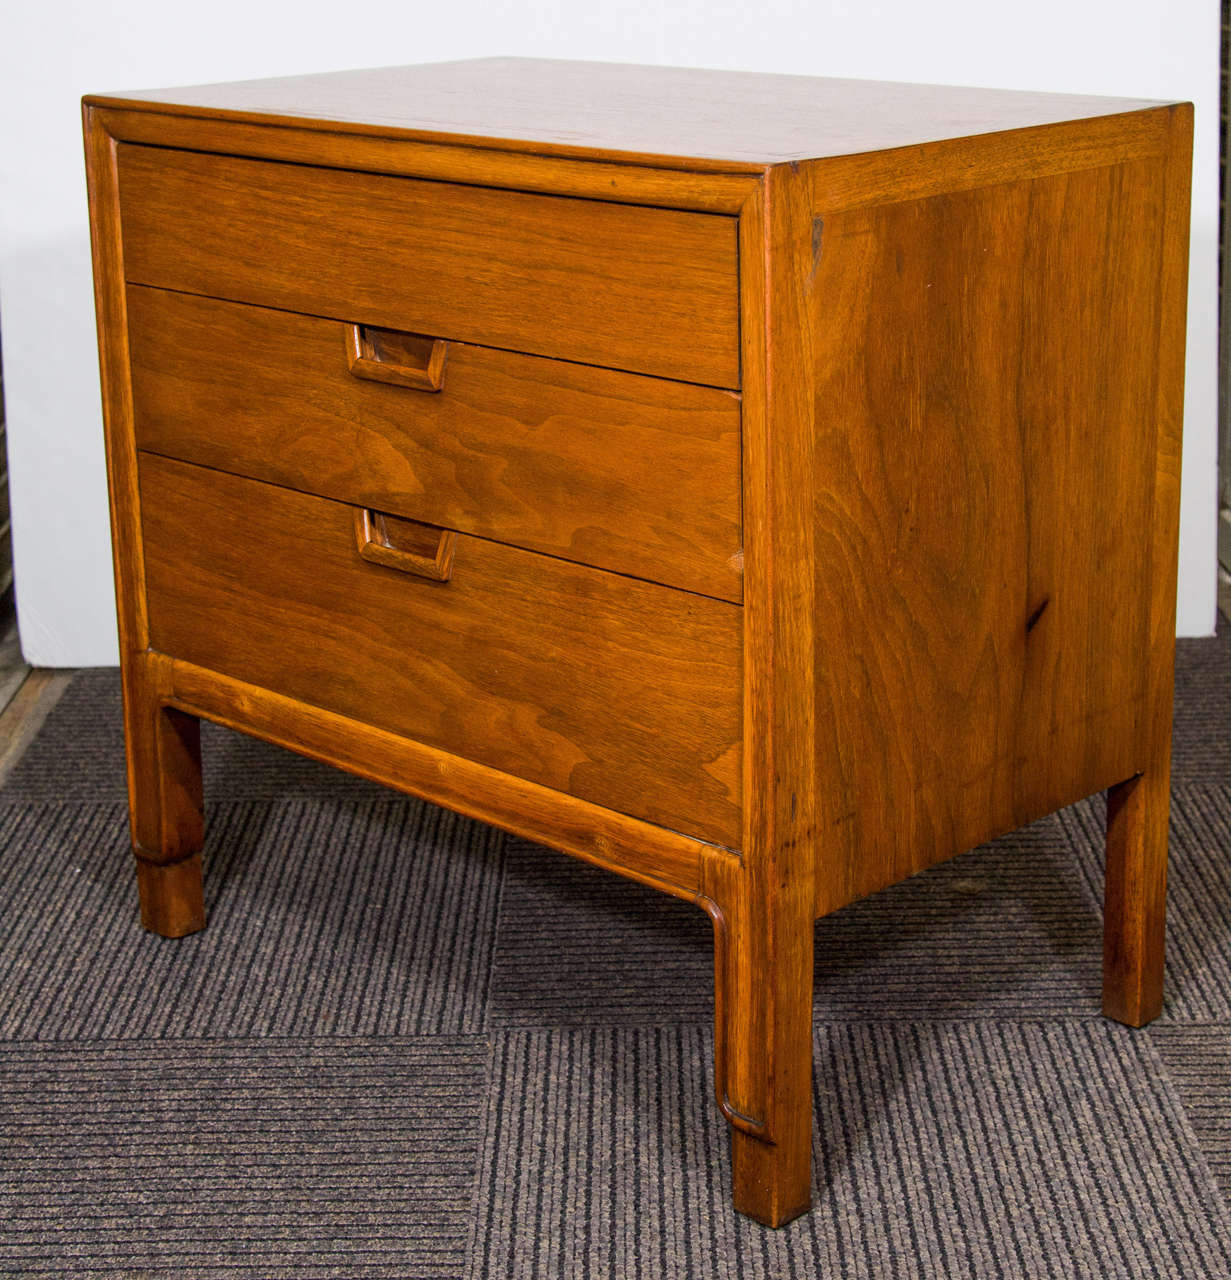 A vintage pair of three-drawer Janus Collection nightstands or bedside tables designed by John Stuart for Mt. Airy Furniture.

Good vintage condition with age appropriate wear.